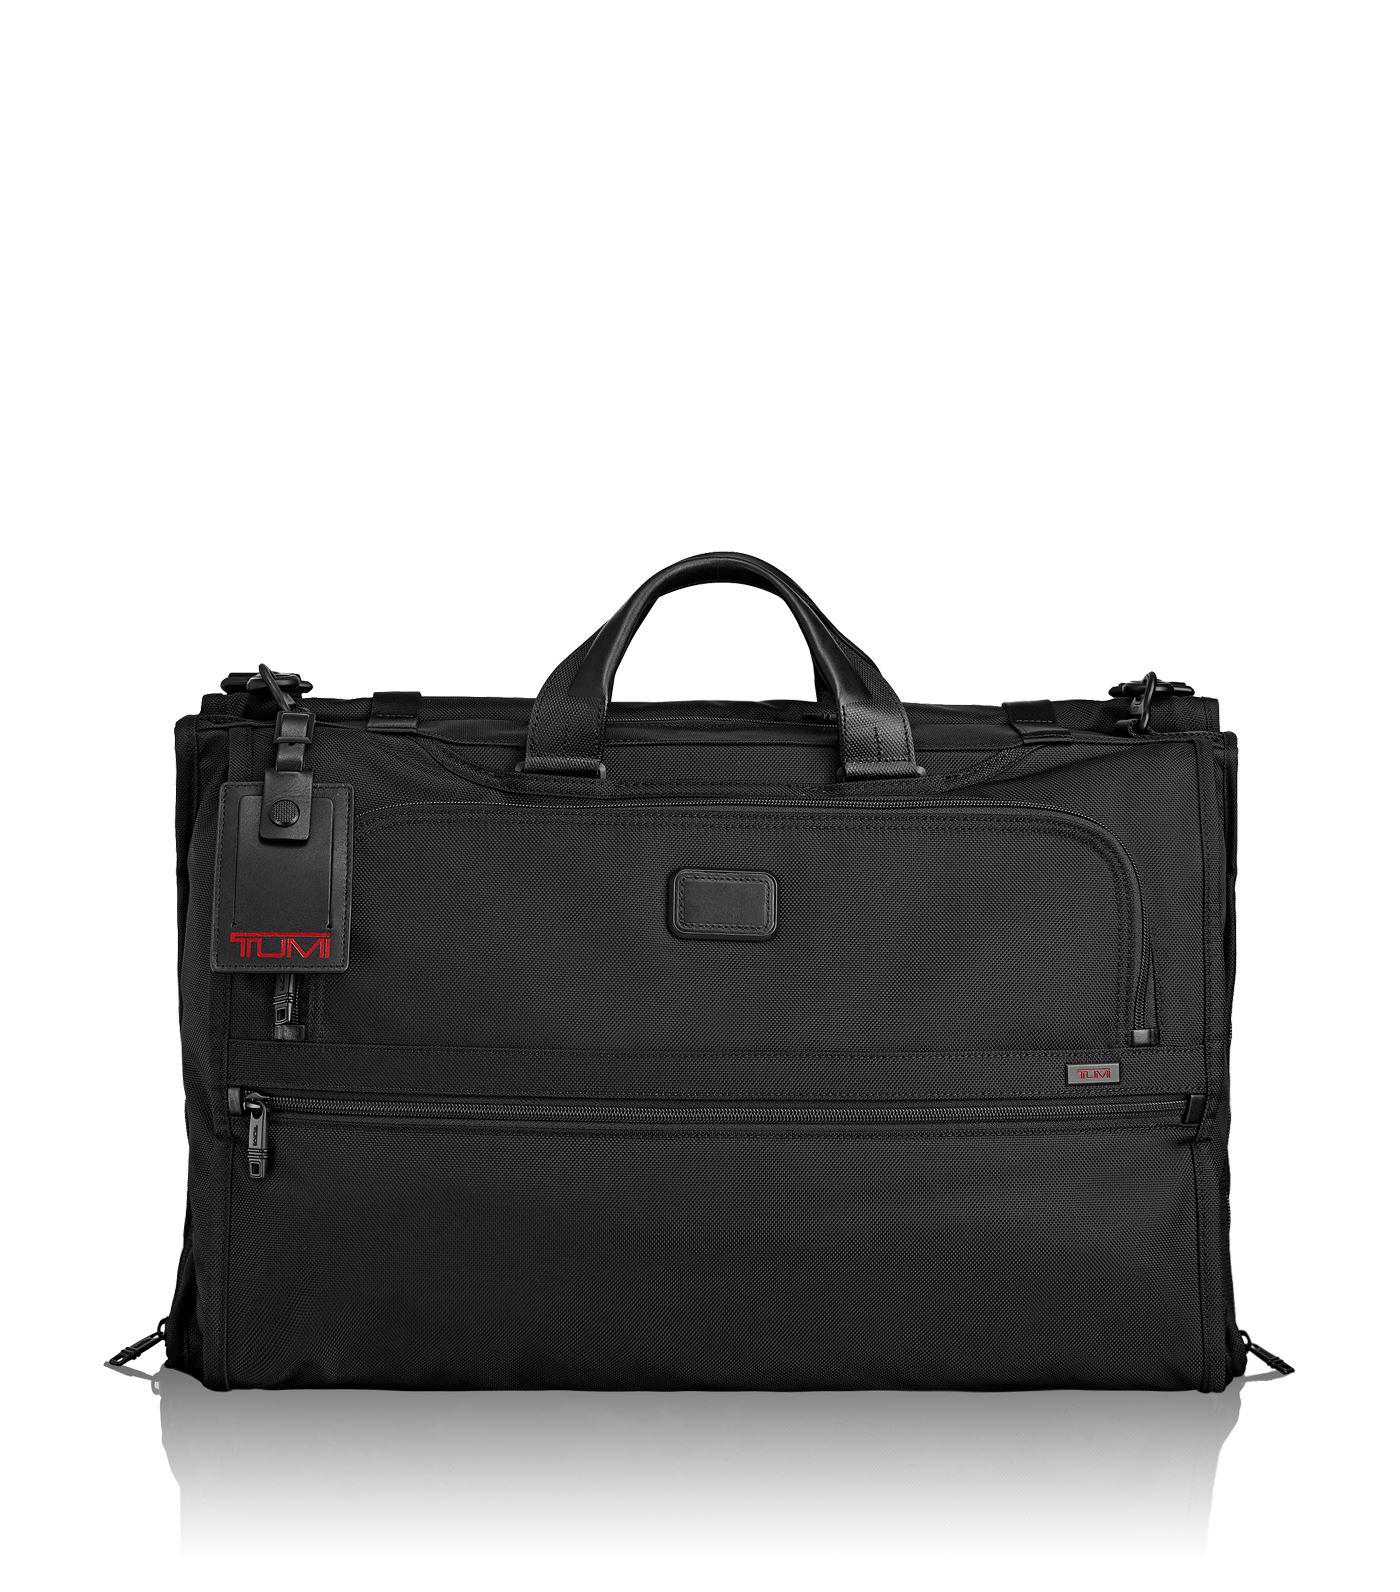 Tumi Synthetic Tri-fold Carry-on Garment Bag in Black for Men - Lyst